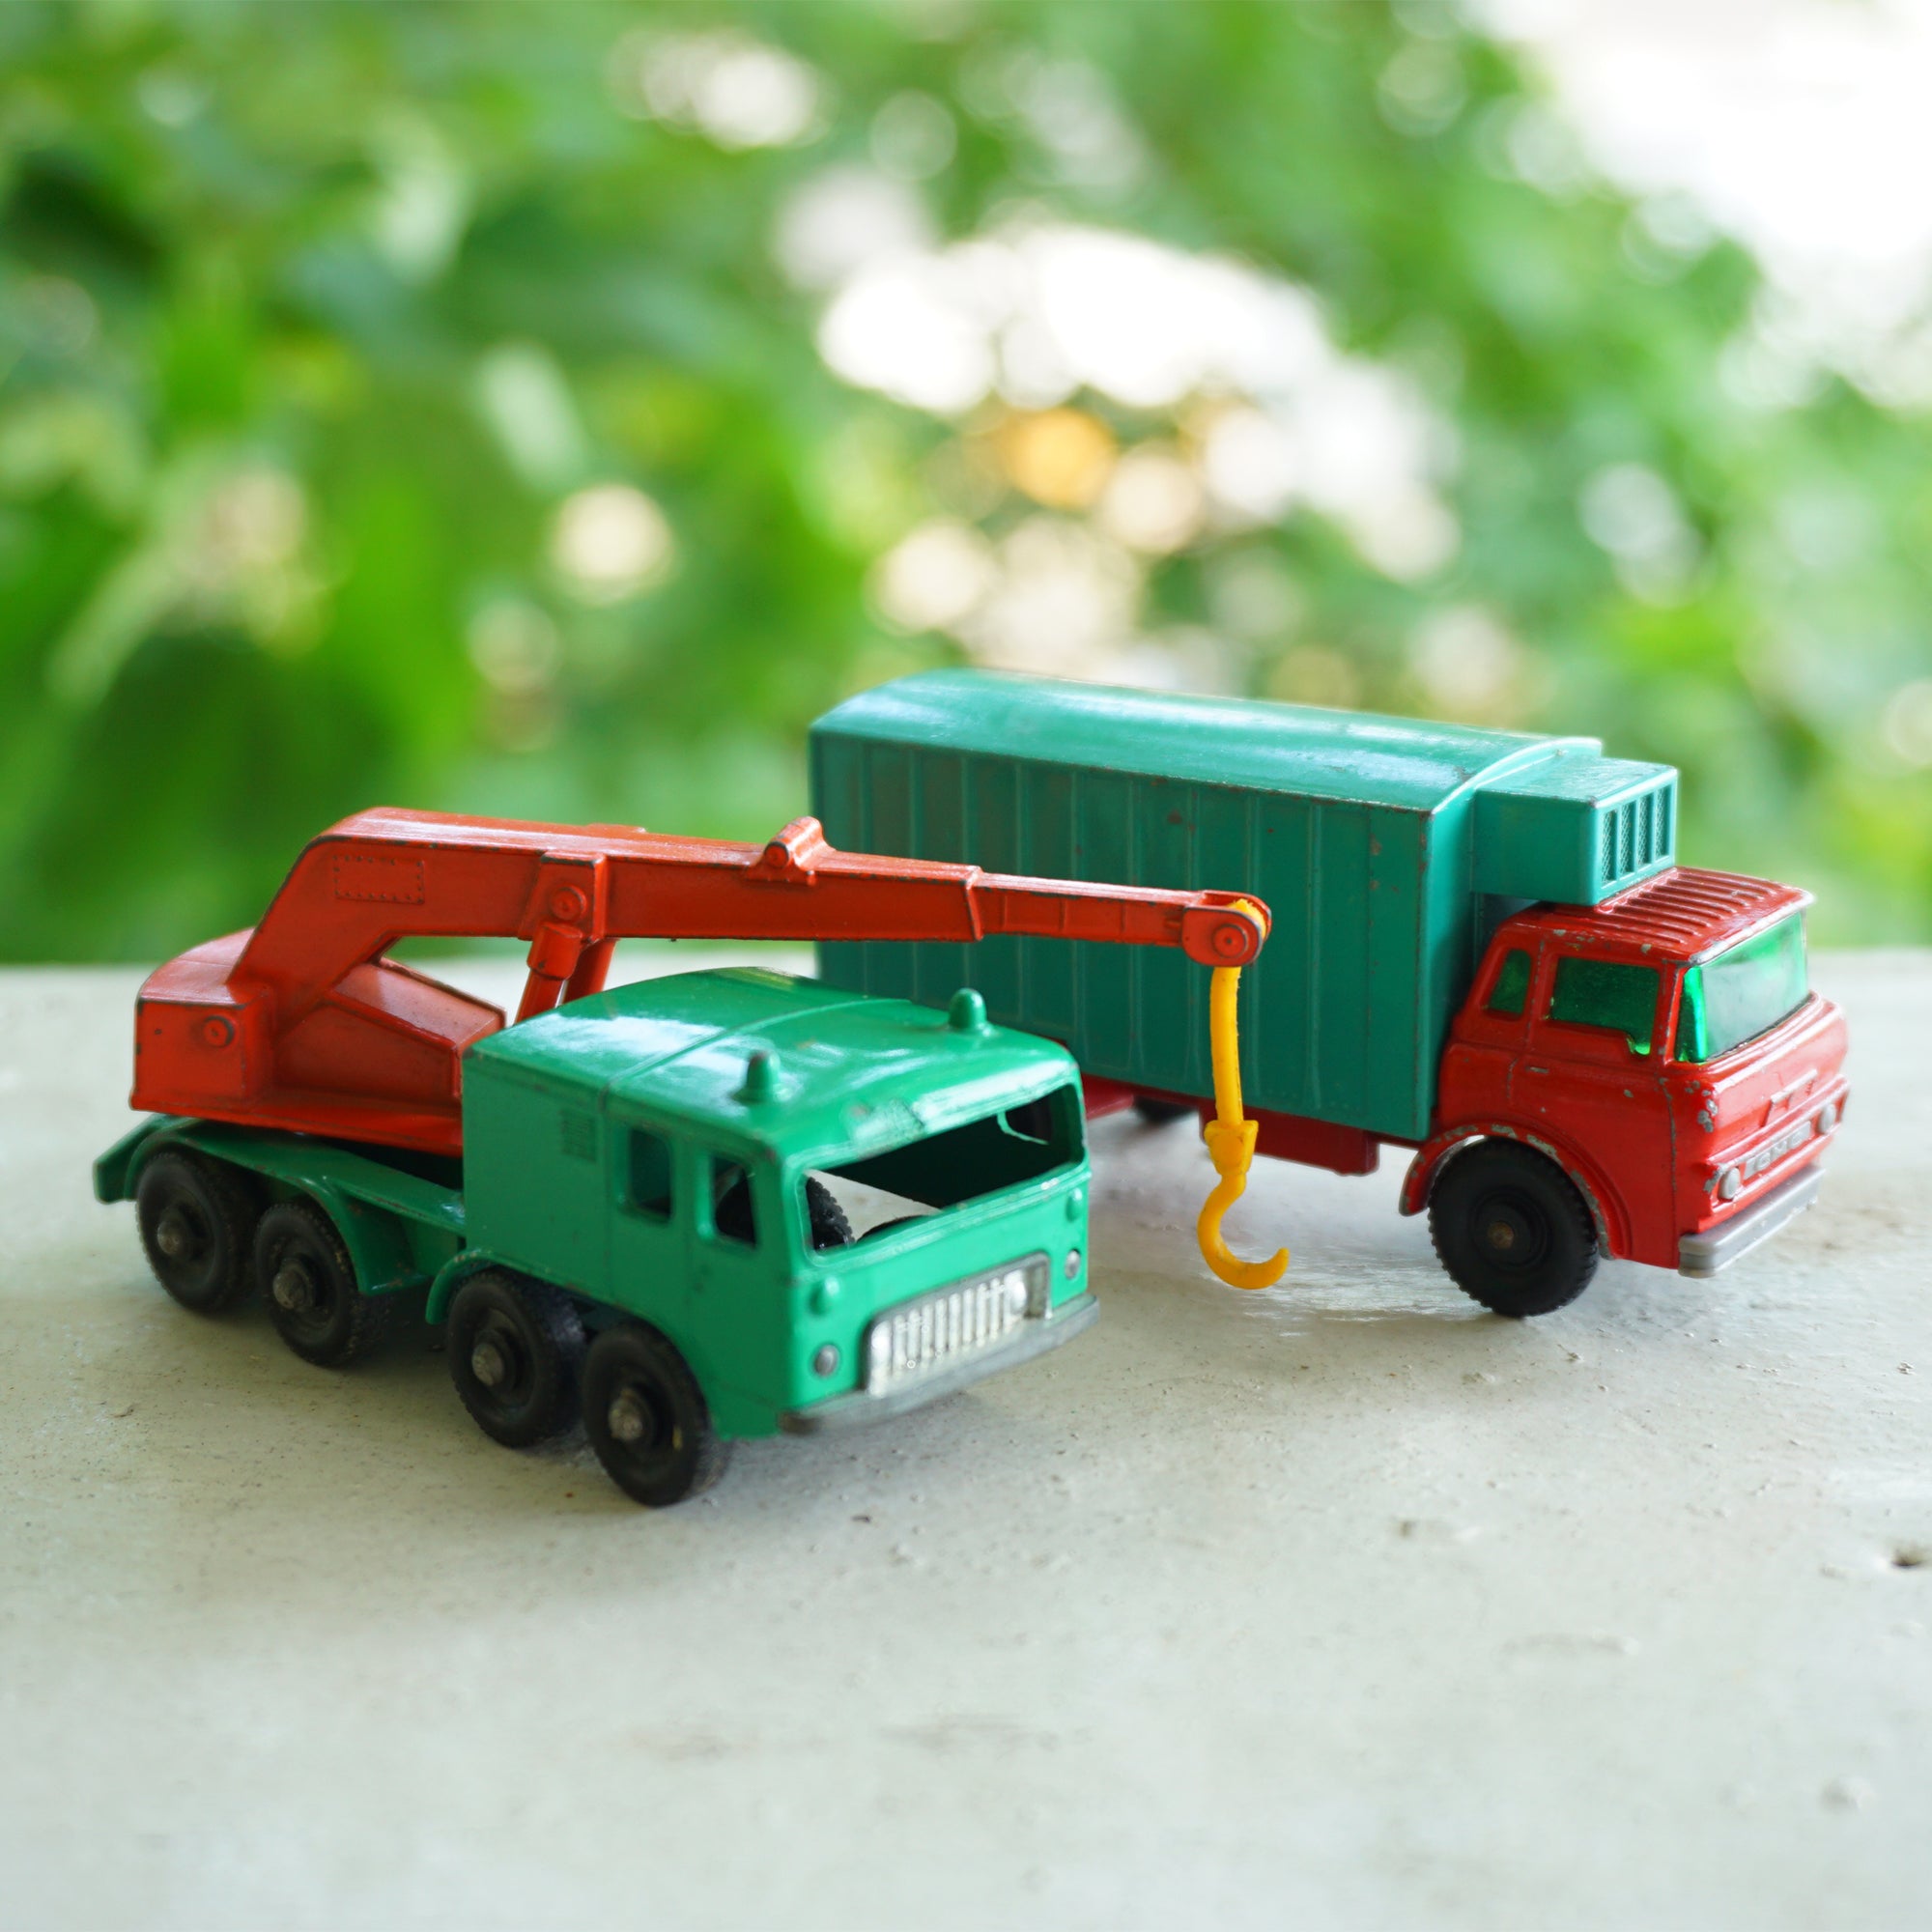 1965 Vintage Diecast MATCHBOX Series No. 30: 8 Wheel Crane. Made in England by Lesney.